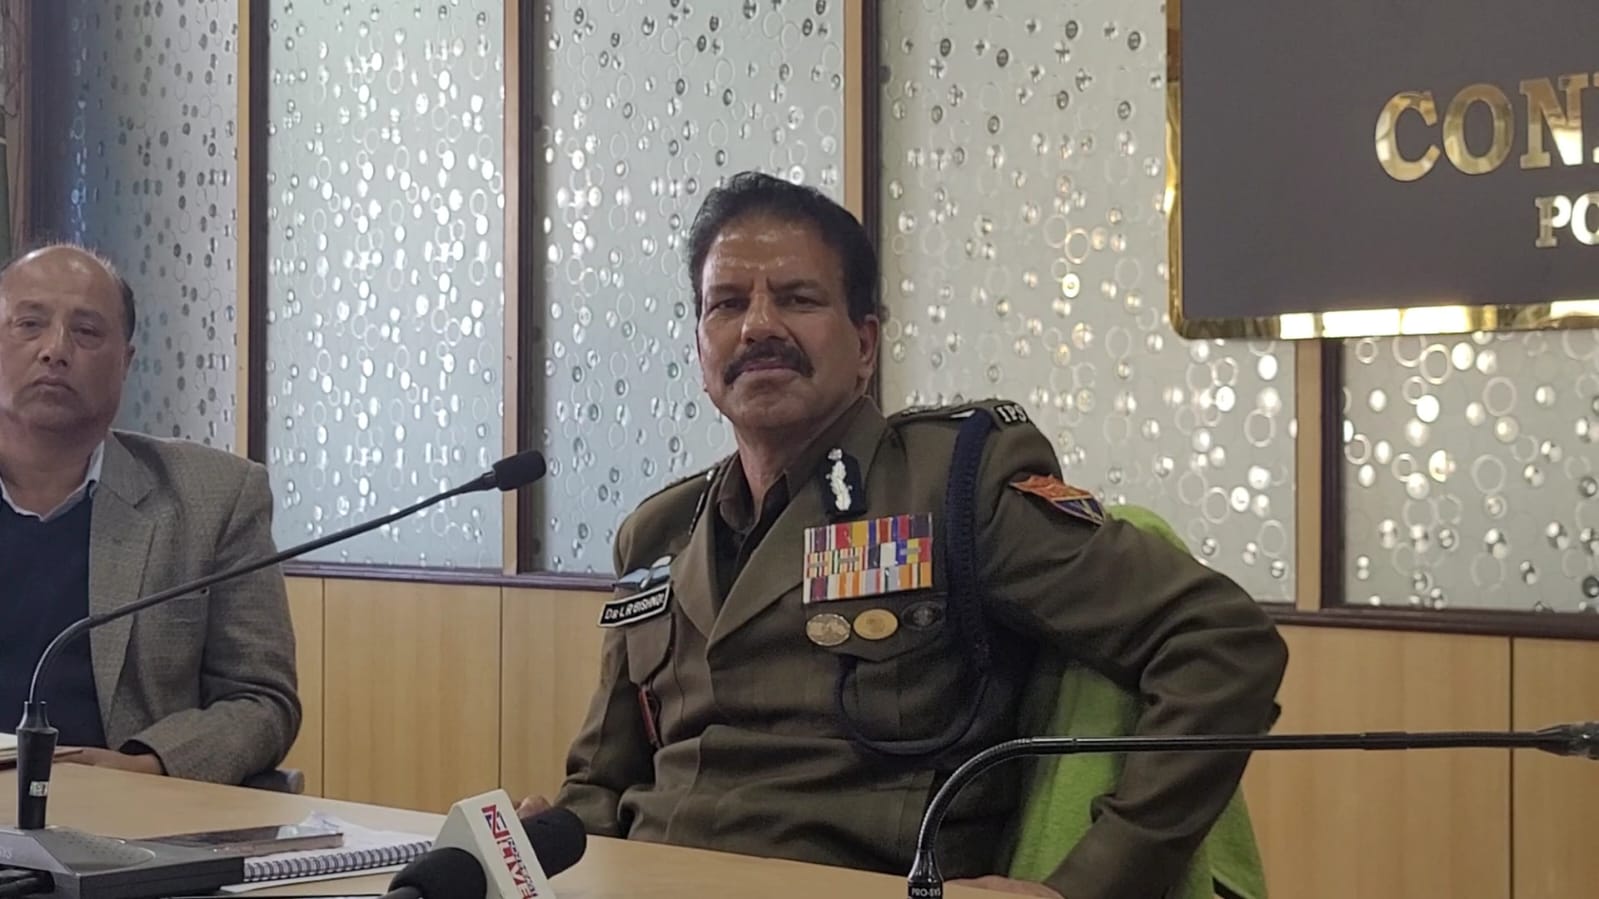 Police investigates FIR against DGP Bishnoi for allegedly using fake number plate